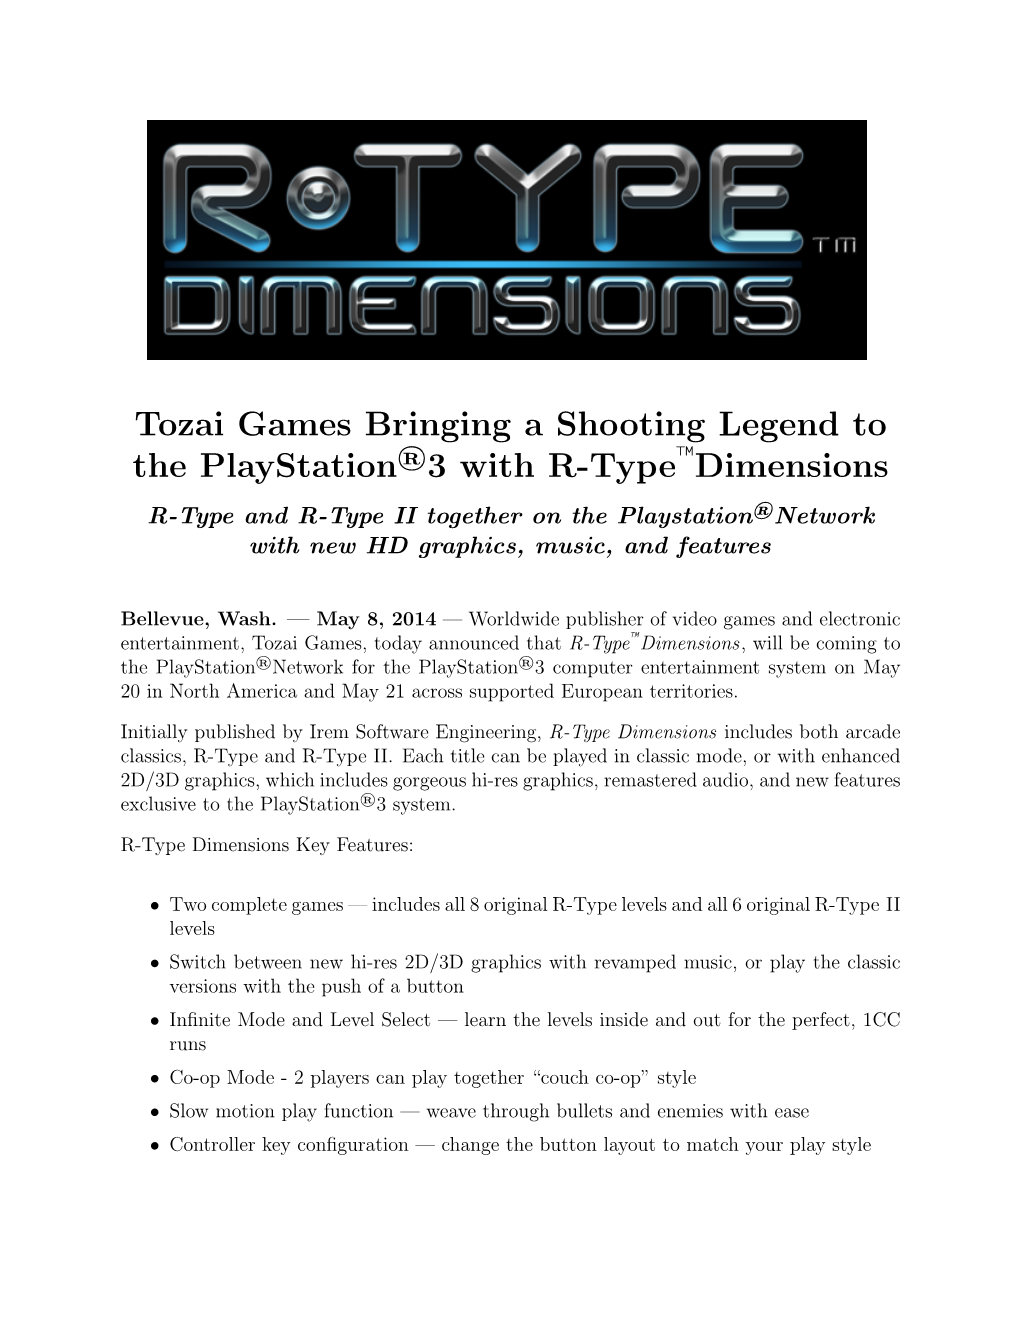 Tozai Games Bringing a Shooting Legend to the Playstation®3 with R